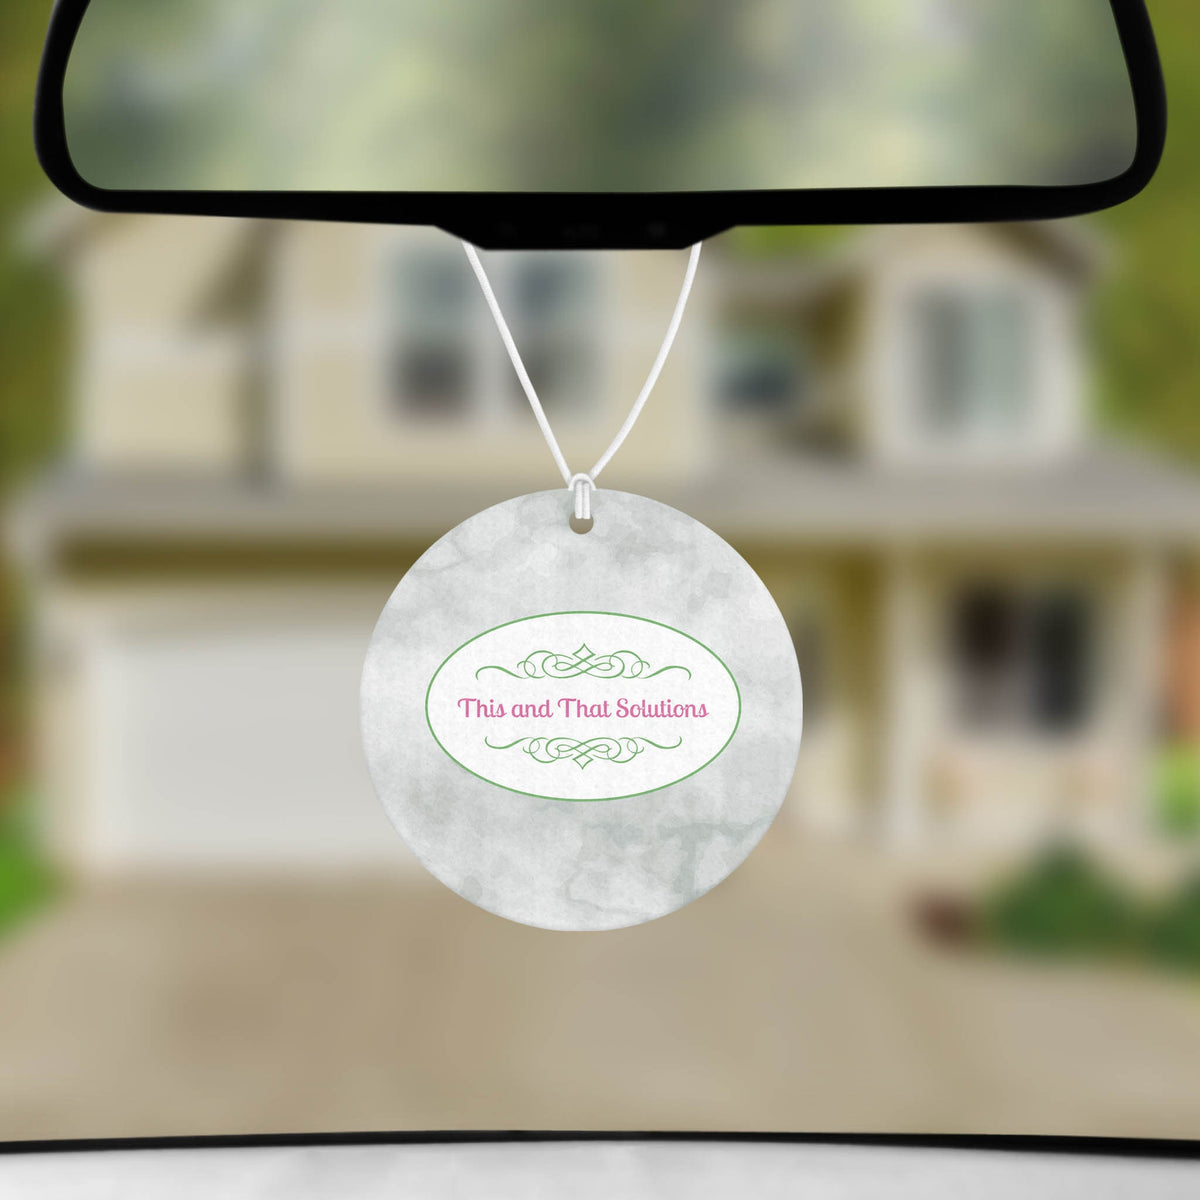 Personalized Air Fresheners | Set of 2 | Custom Car Accessories | Company Logo